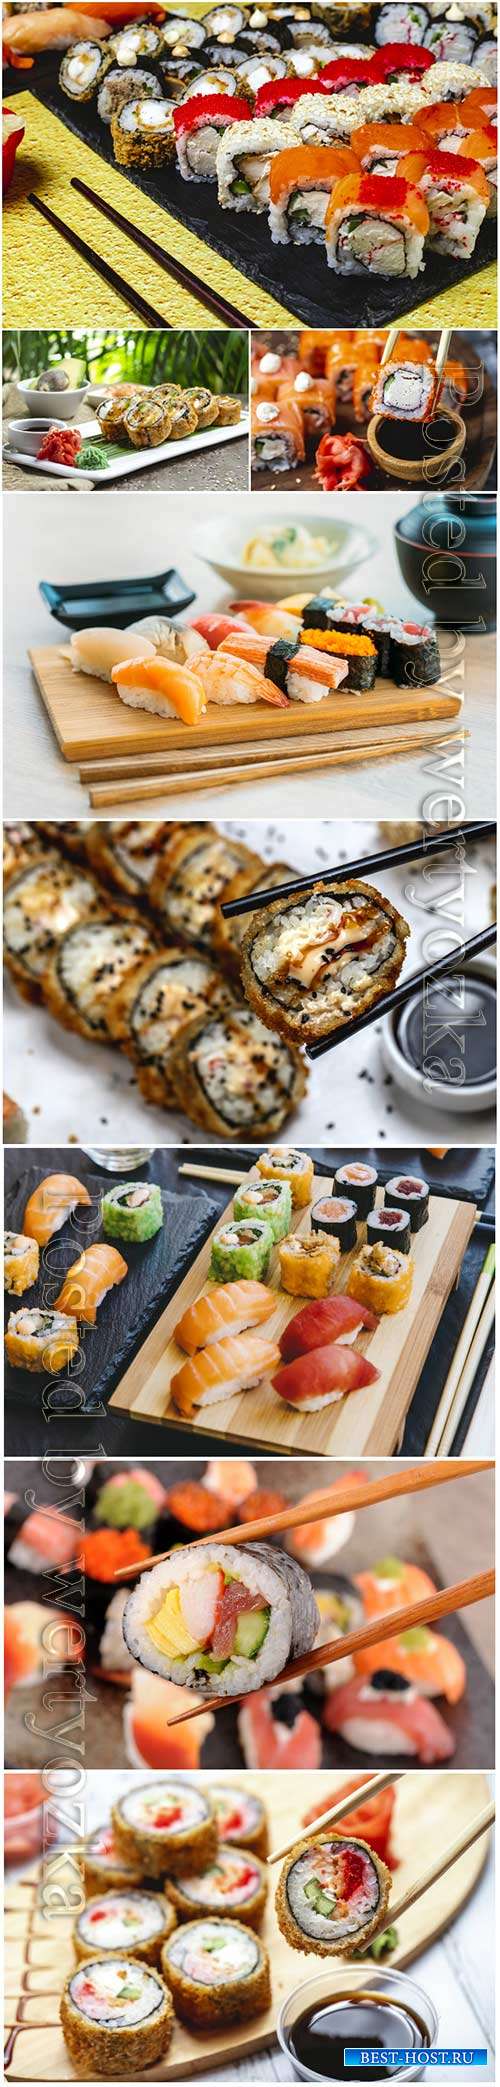 Sushi roll sets with wasabi sauce